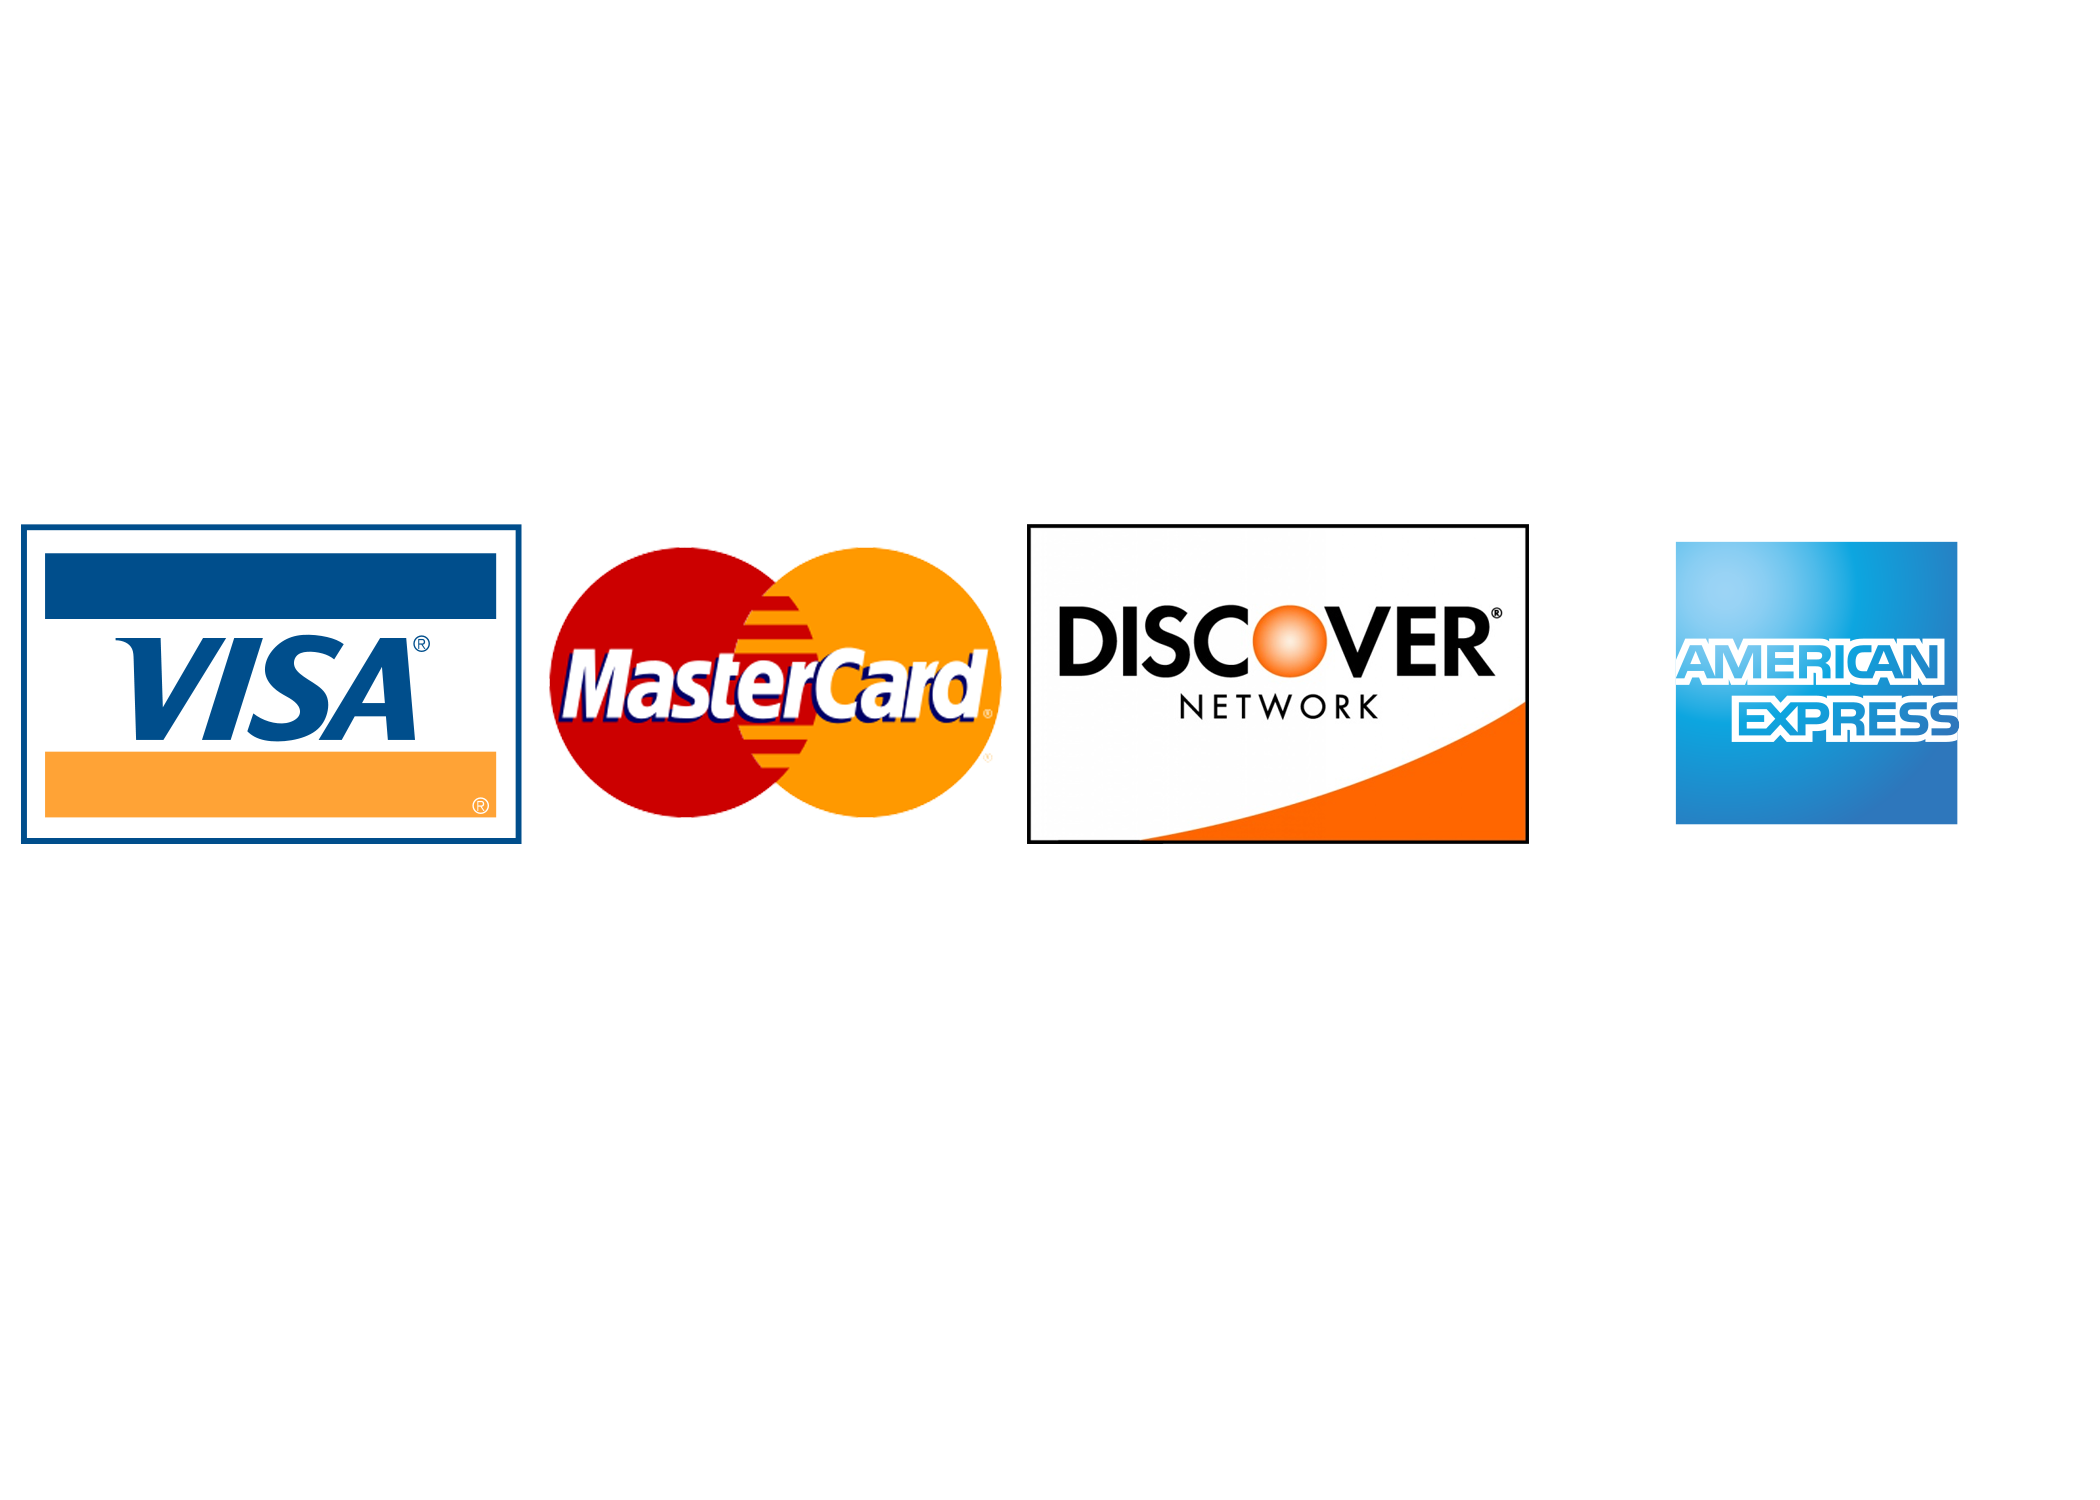 Images of accepted credit cards